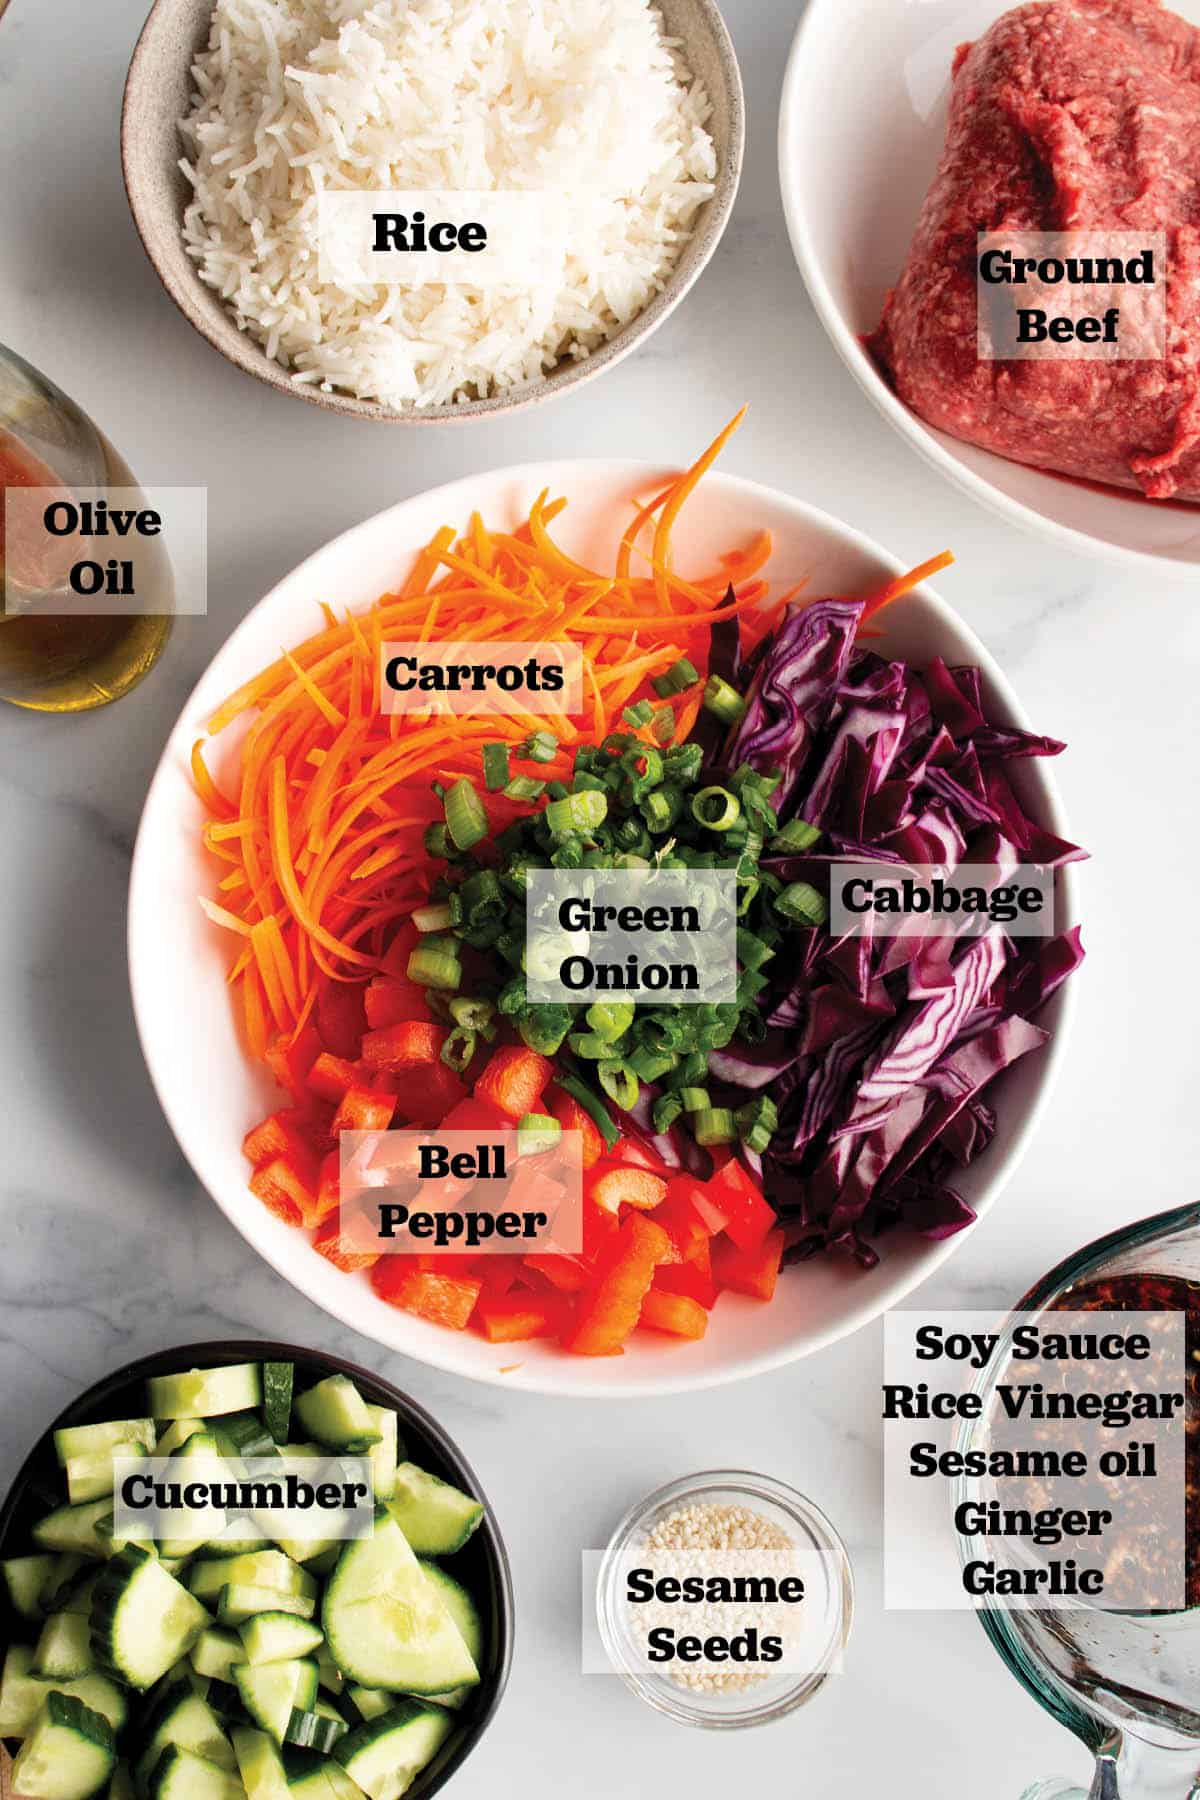 Ingredients in prep bowls. Ground beef, Cooked rice, olive oil, cucumbers, sesame seeds, a soy sauce mix, and a bowl of julienne carrots, chopped peppers, cabbage and green onions. 